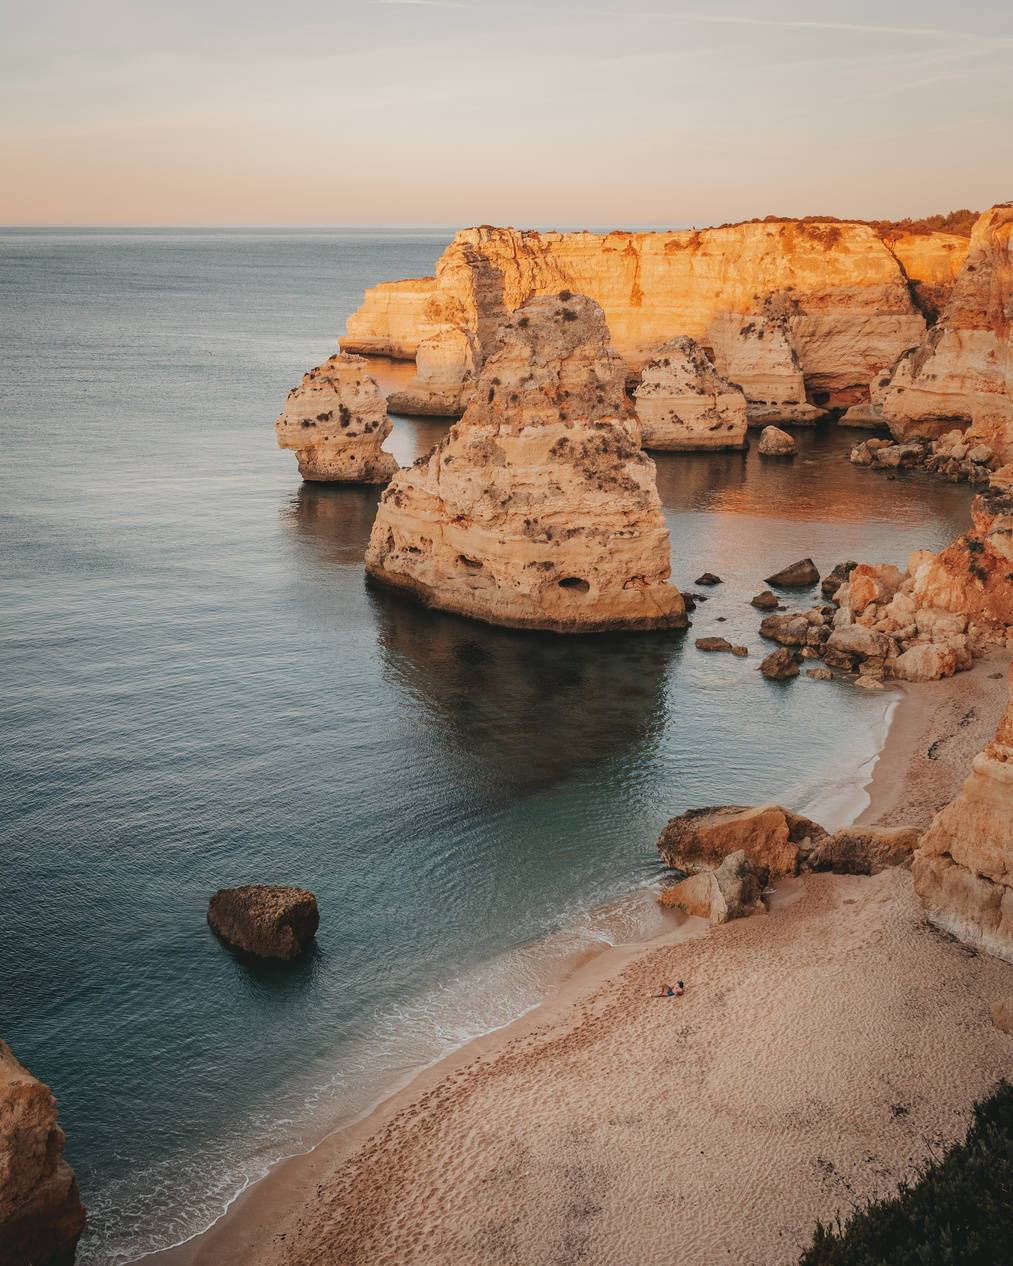 A Picturesque Scenery of the Marinha Beach